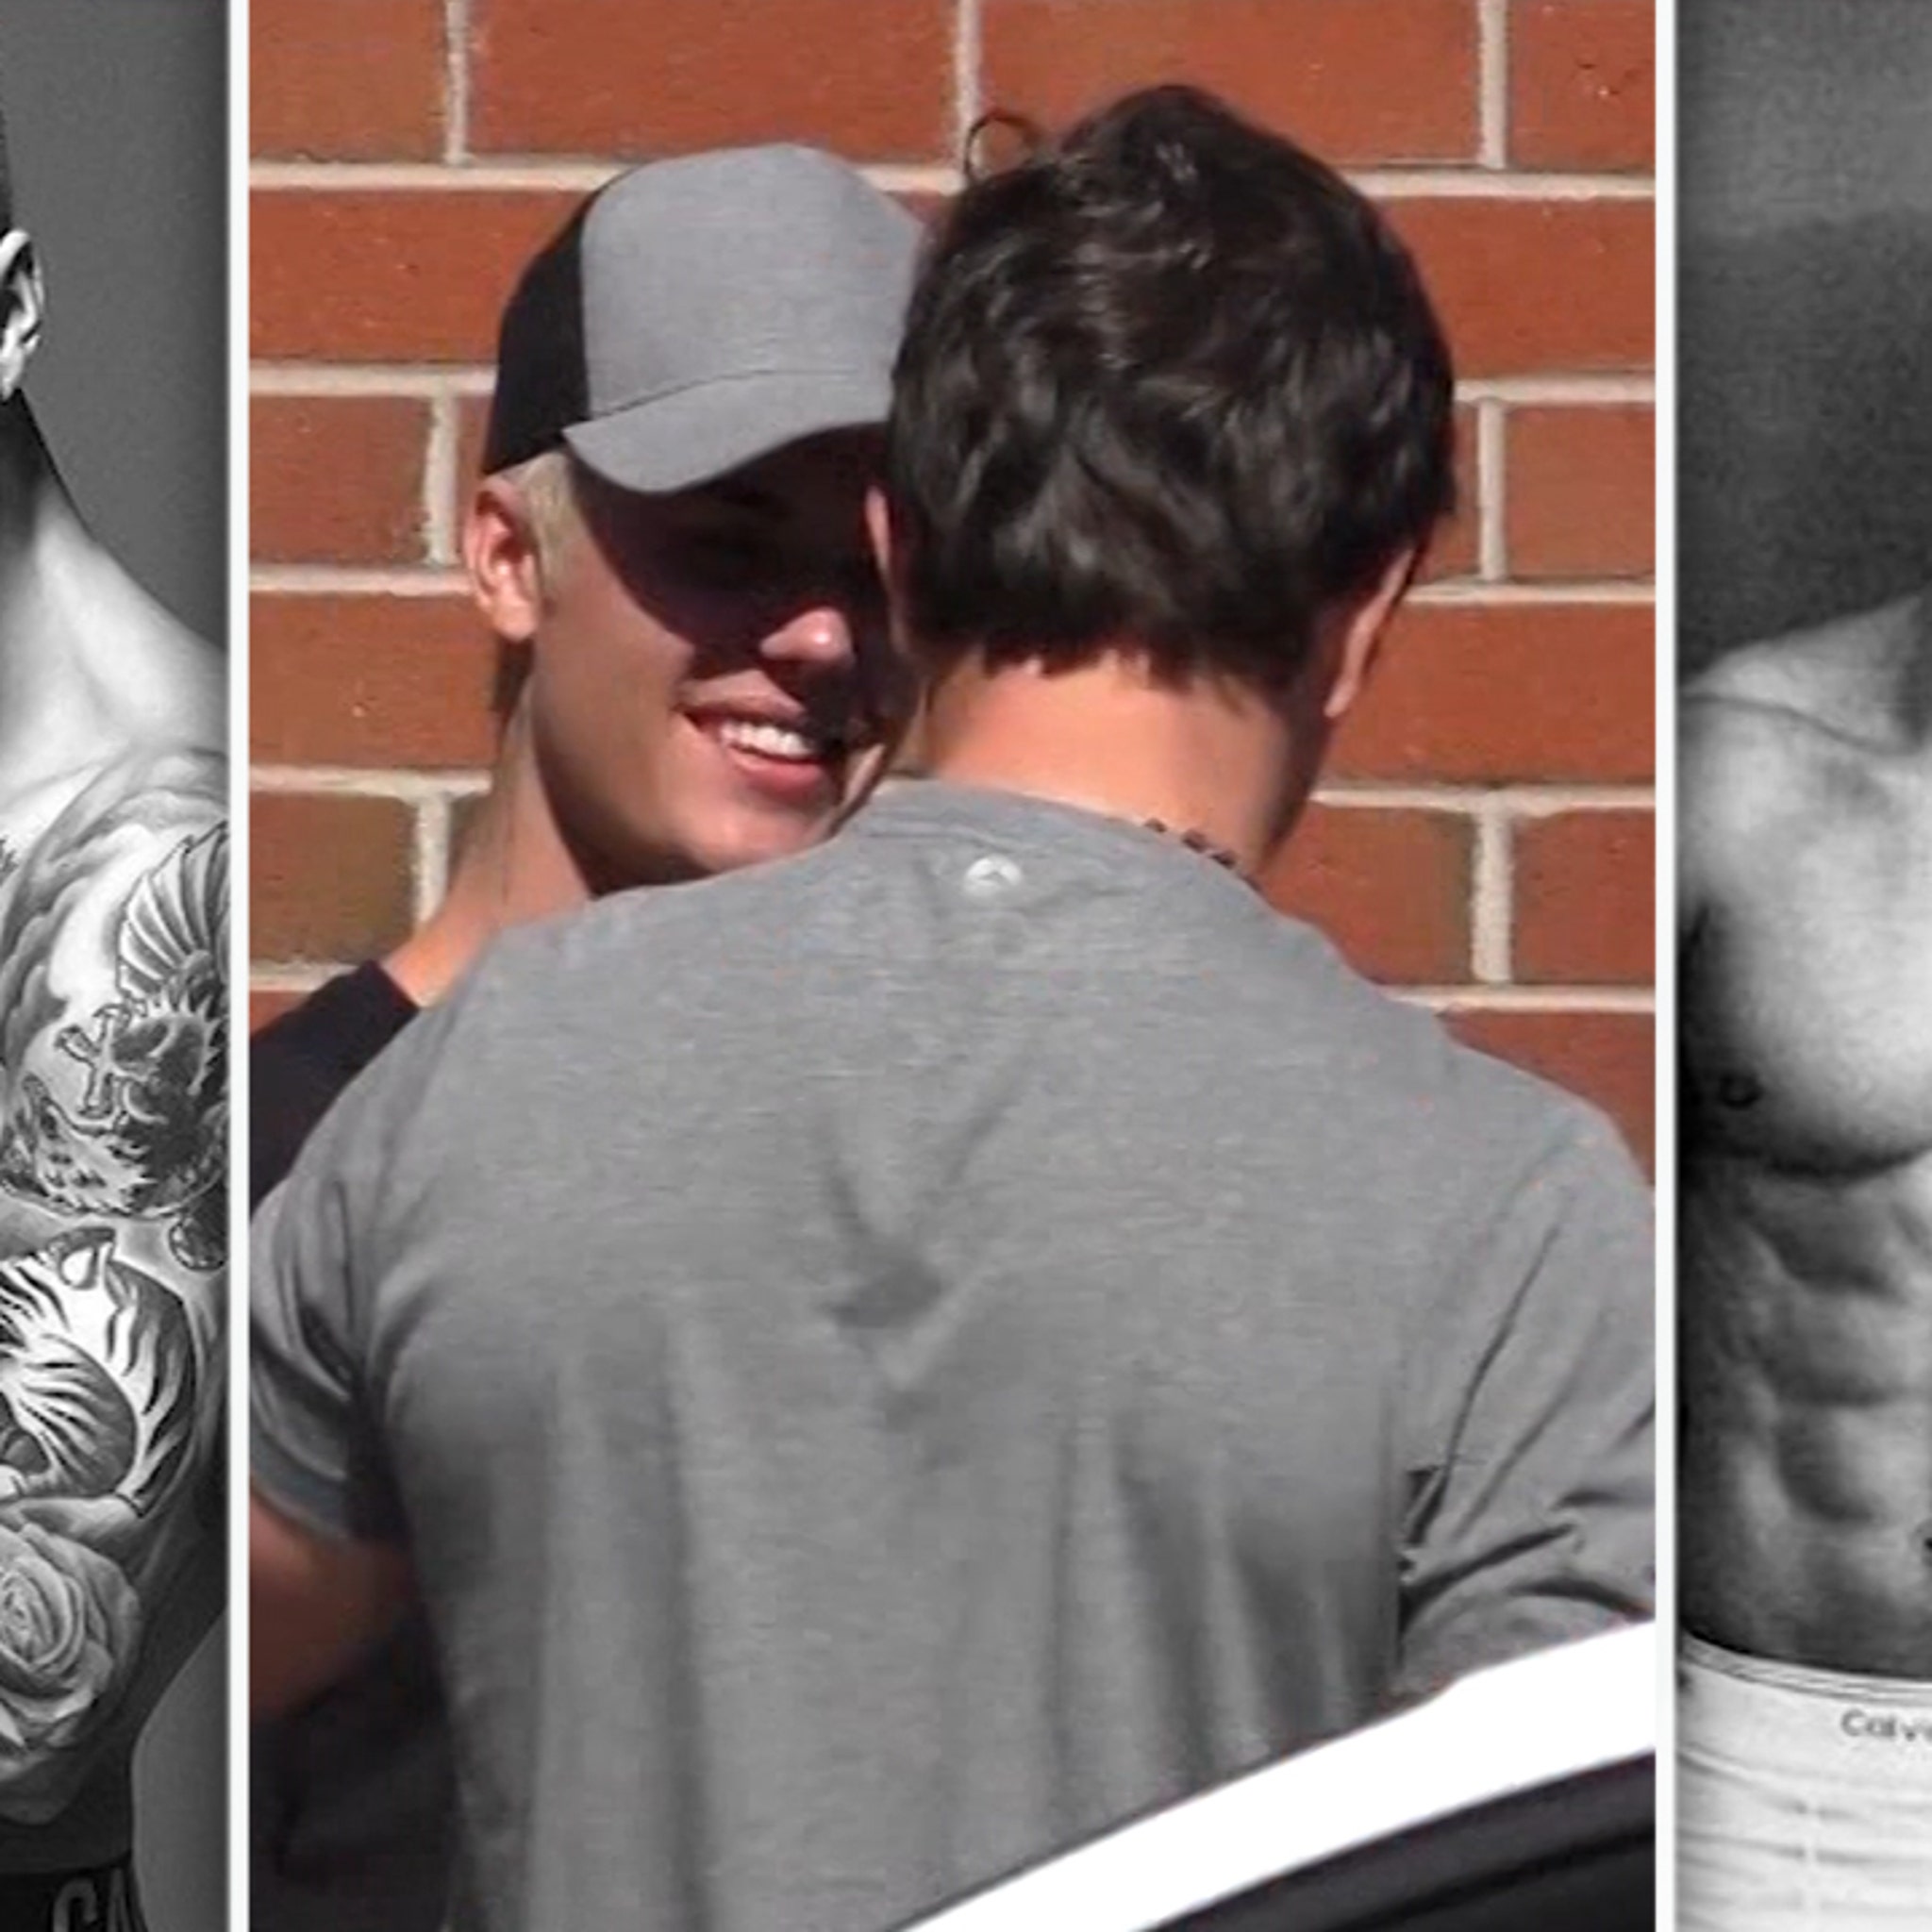 This is the cringe-worthy way Mark Wahlberg reacted when Justin Bieber sent  him his Calvin